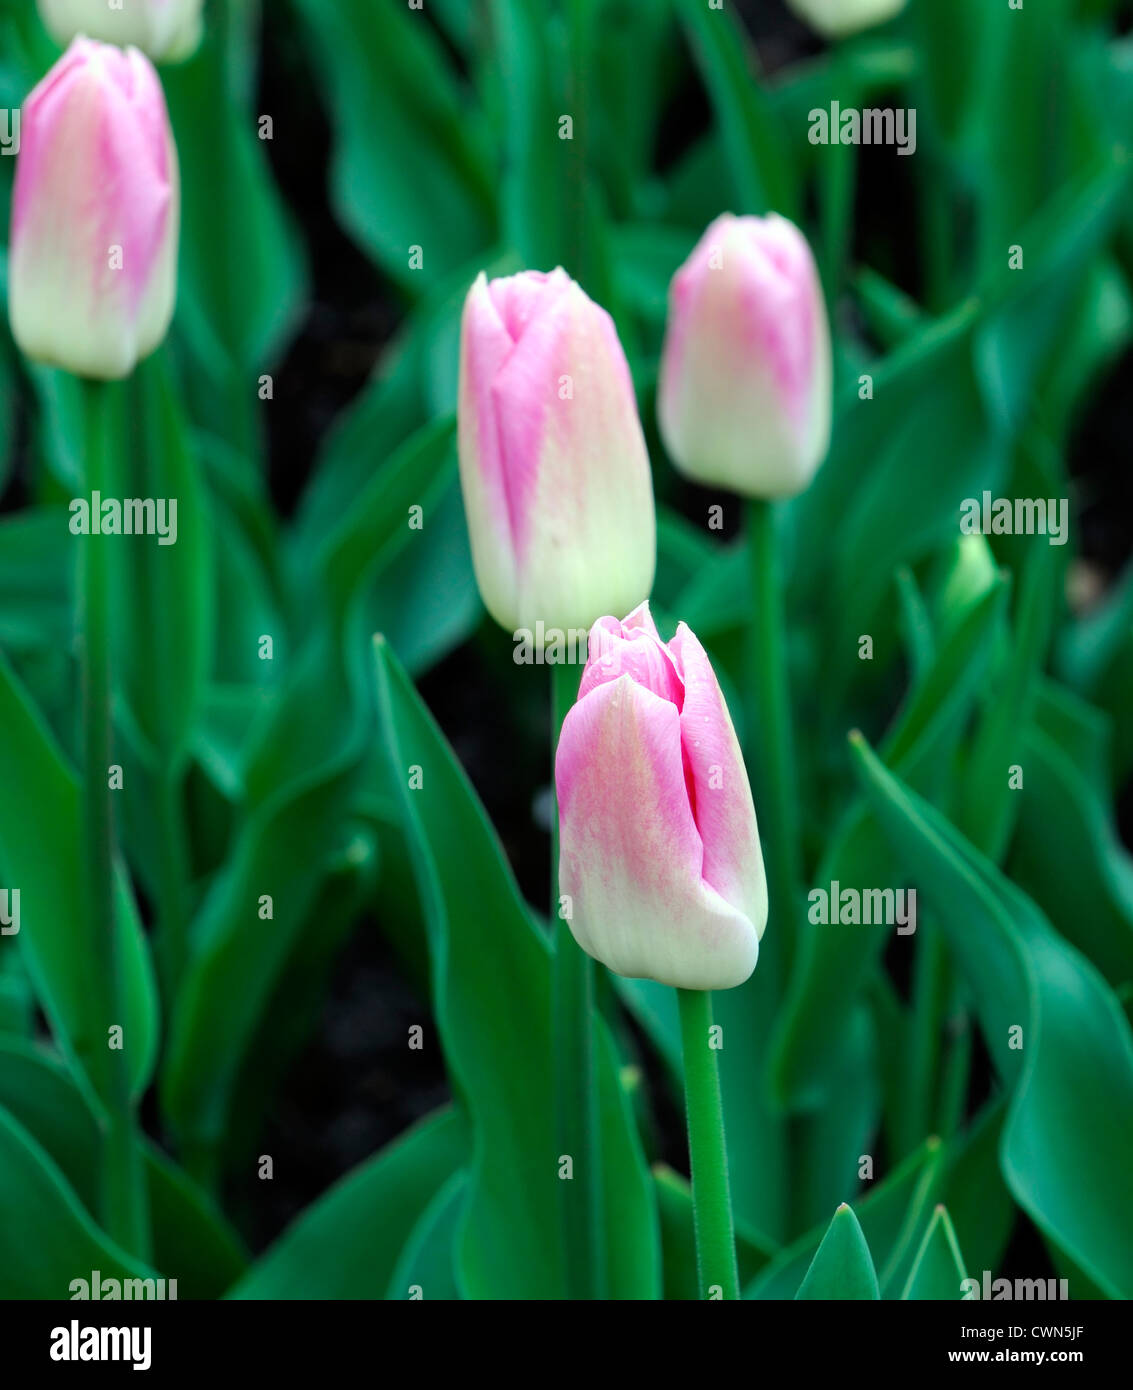 Tulipa dynasty pink white triumph tulip flowers display spring flower bloom blossom bed colour color bulb Stock Photo